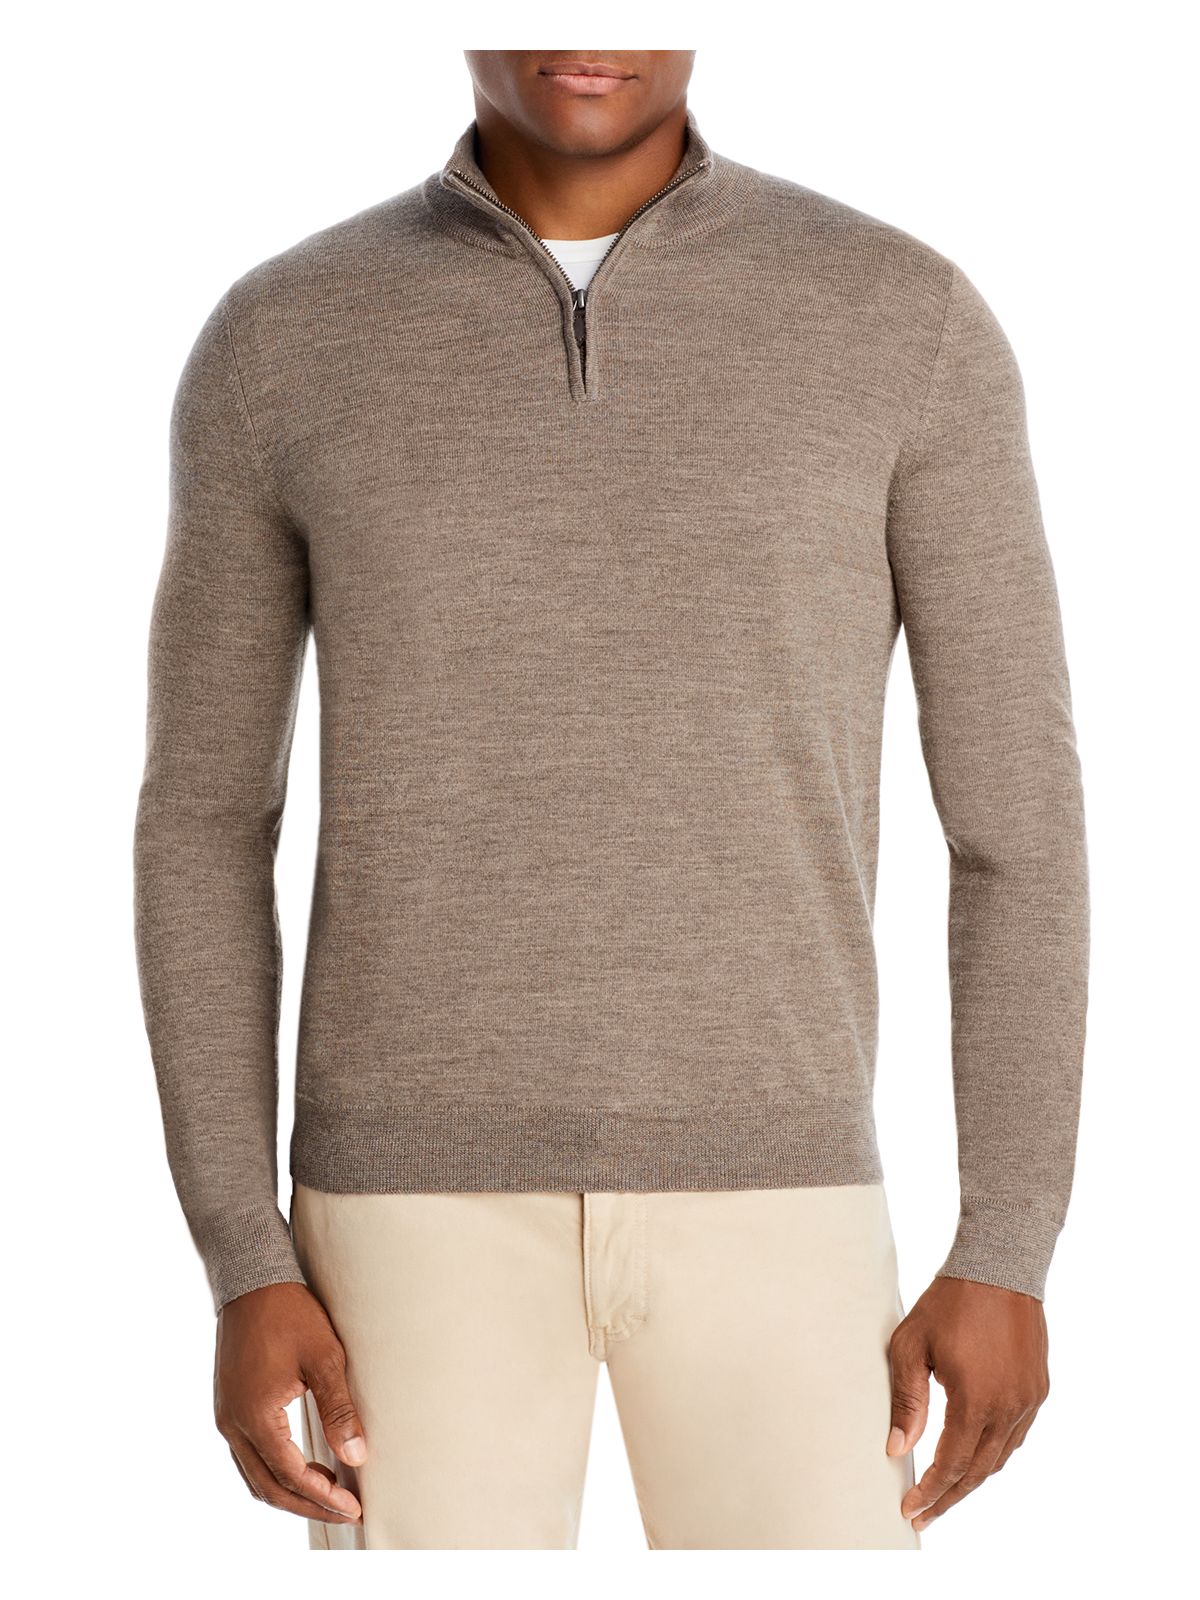 THE MENS STORE Mens Brown Mock Neck Classic Fit Quarter-Zip Merino Blend Pullover Sweater S